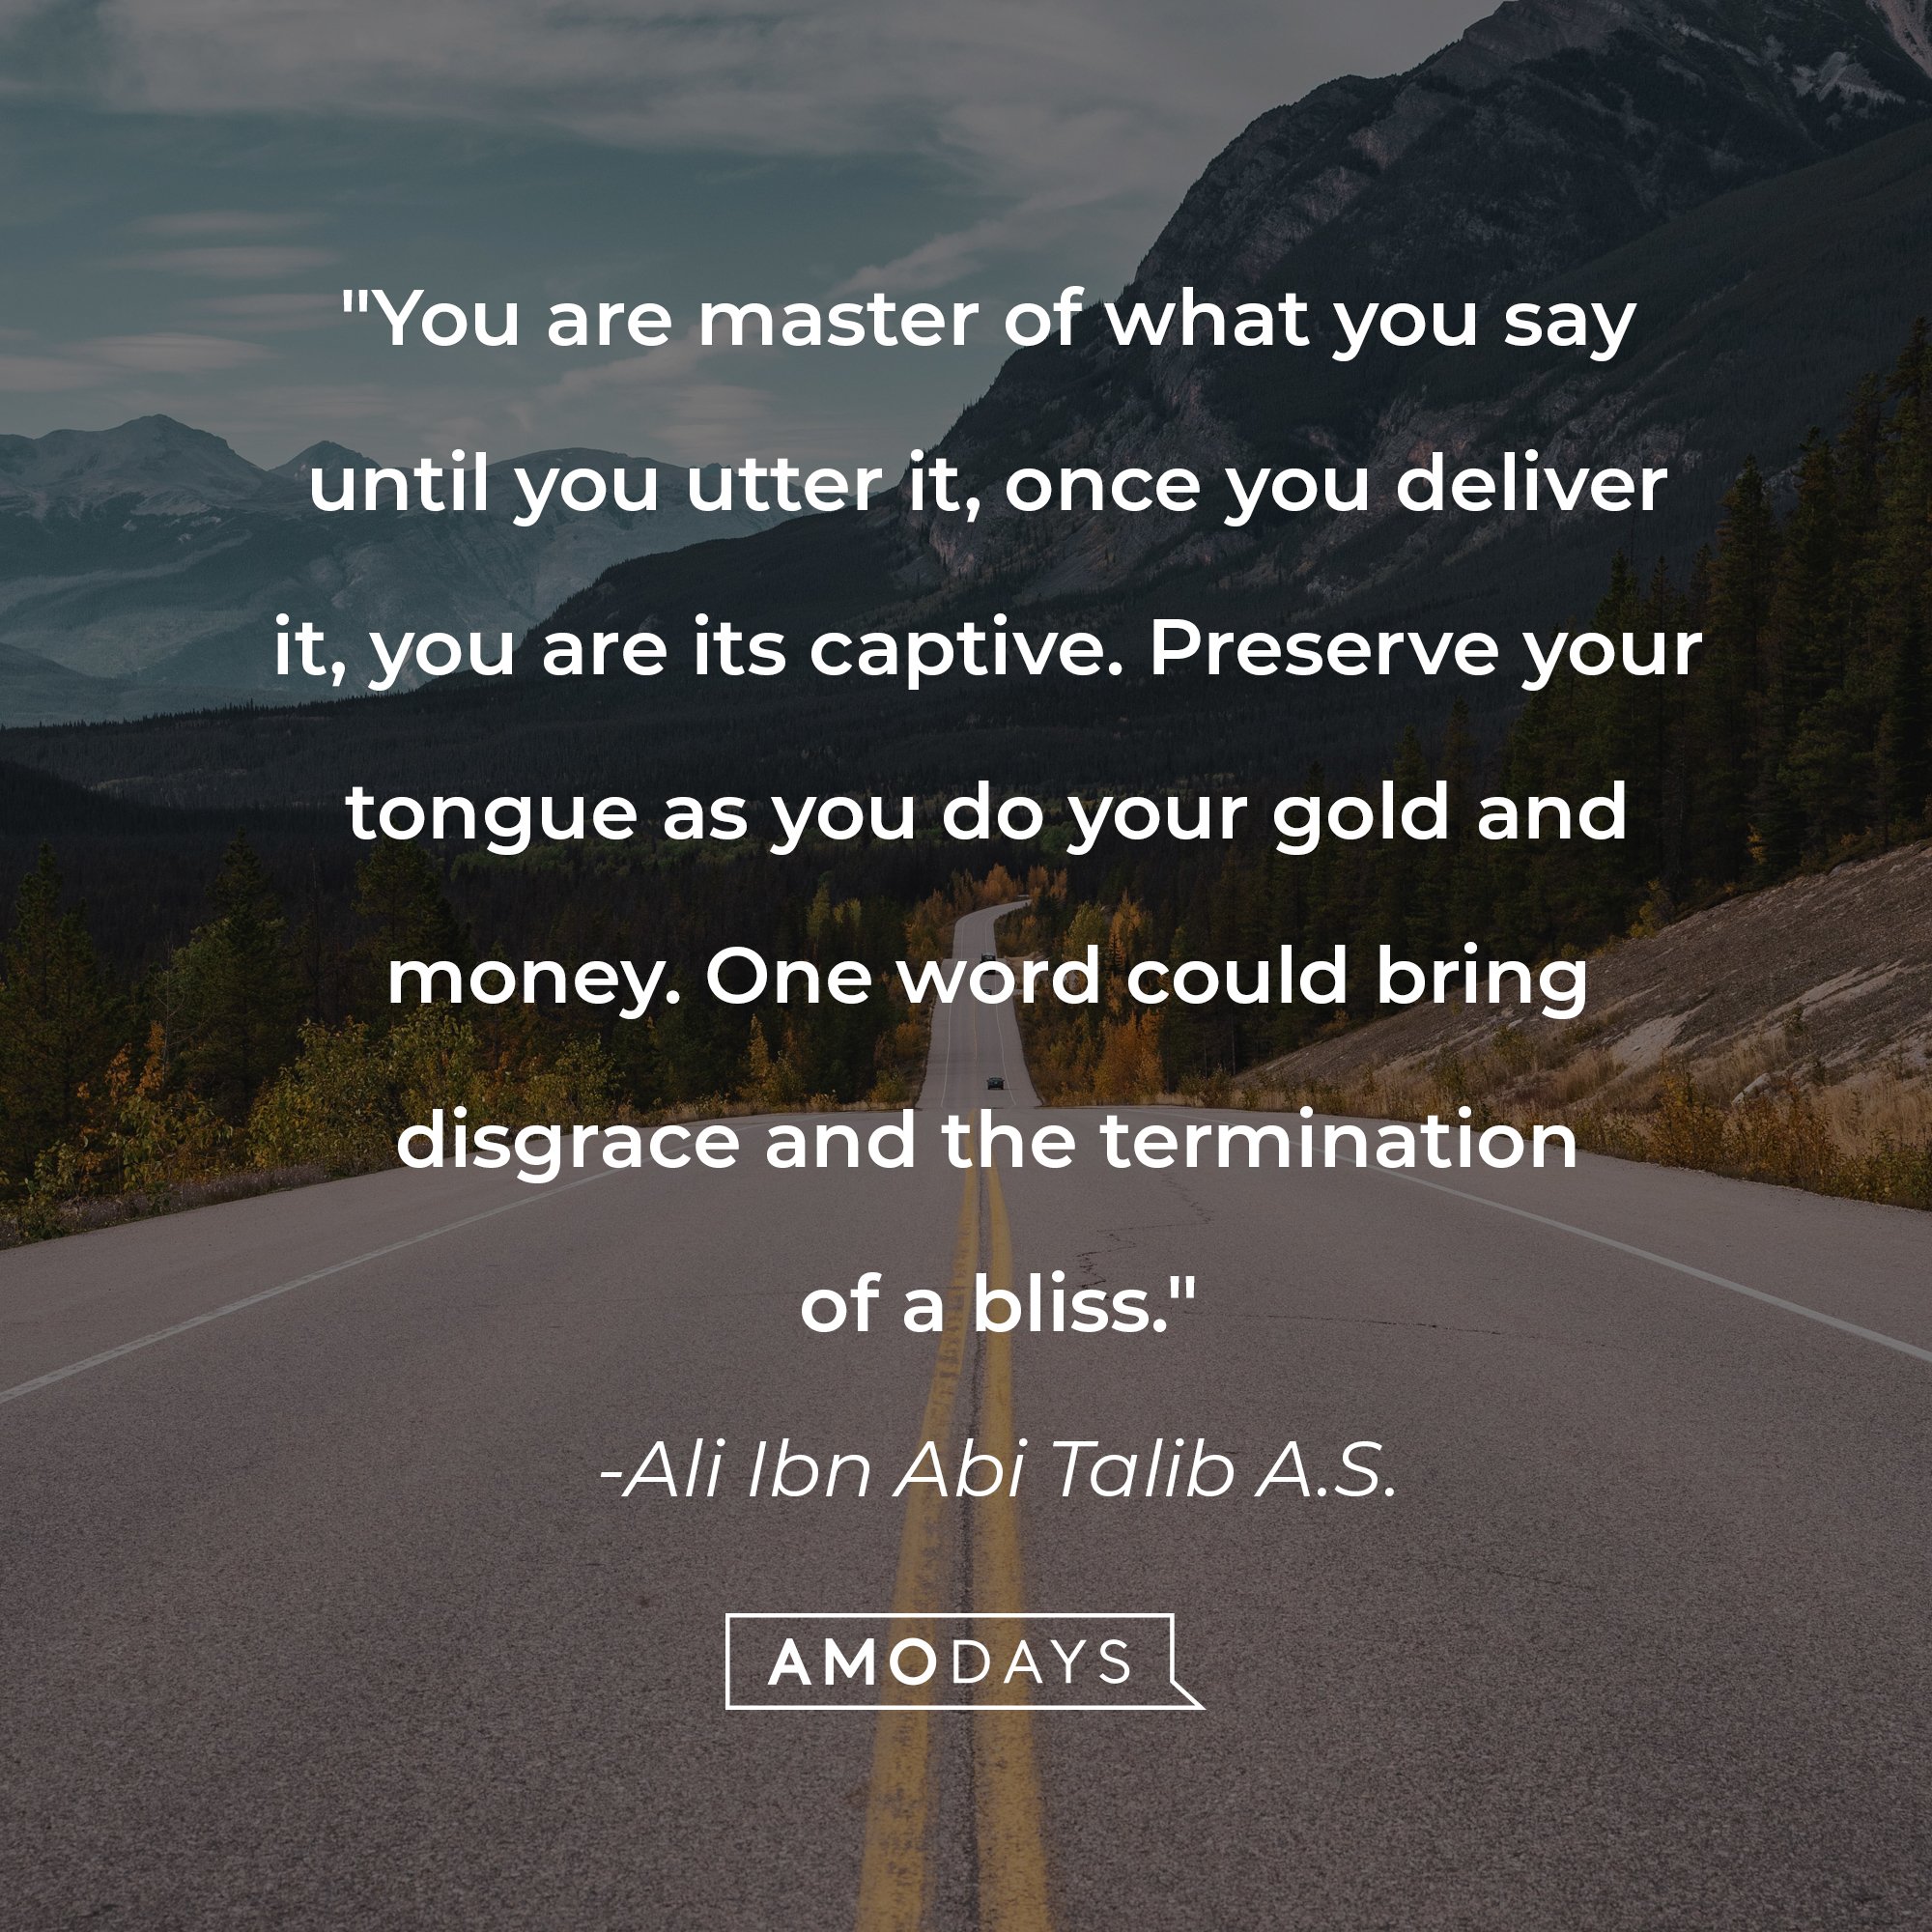 Ali Ibn Abi Talib A.S's quote: "You are master of what you say until you utter it, once you deliver it, you are its captive. Preserve your tongue as you do your gold and money. One word could bring disgrace and the termination of a bliss." | Image: AmoDays 